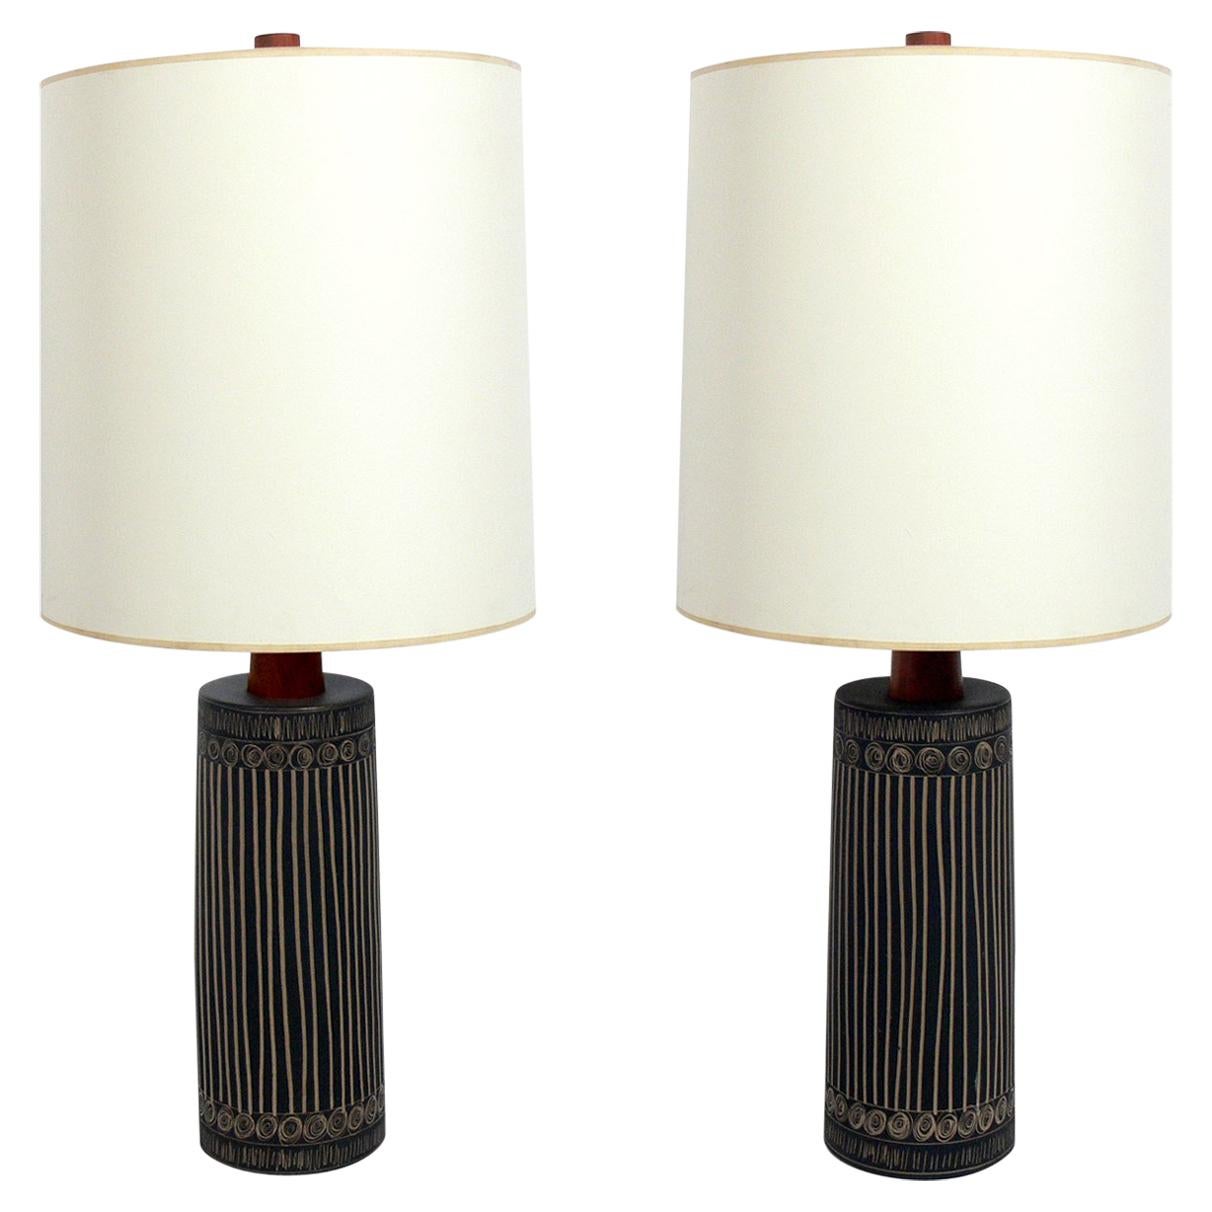 Ceramic and Walnut Lamps by Gordon and Jane Martz